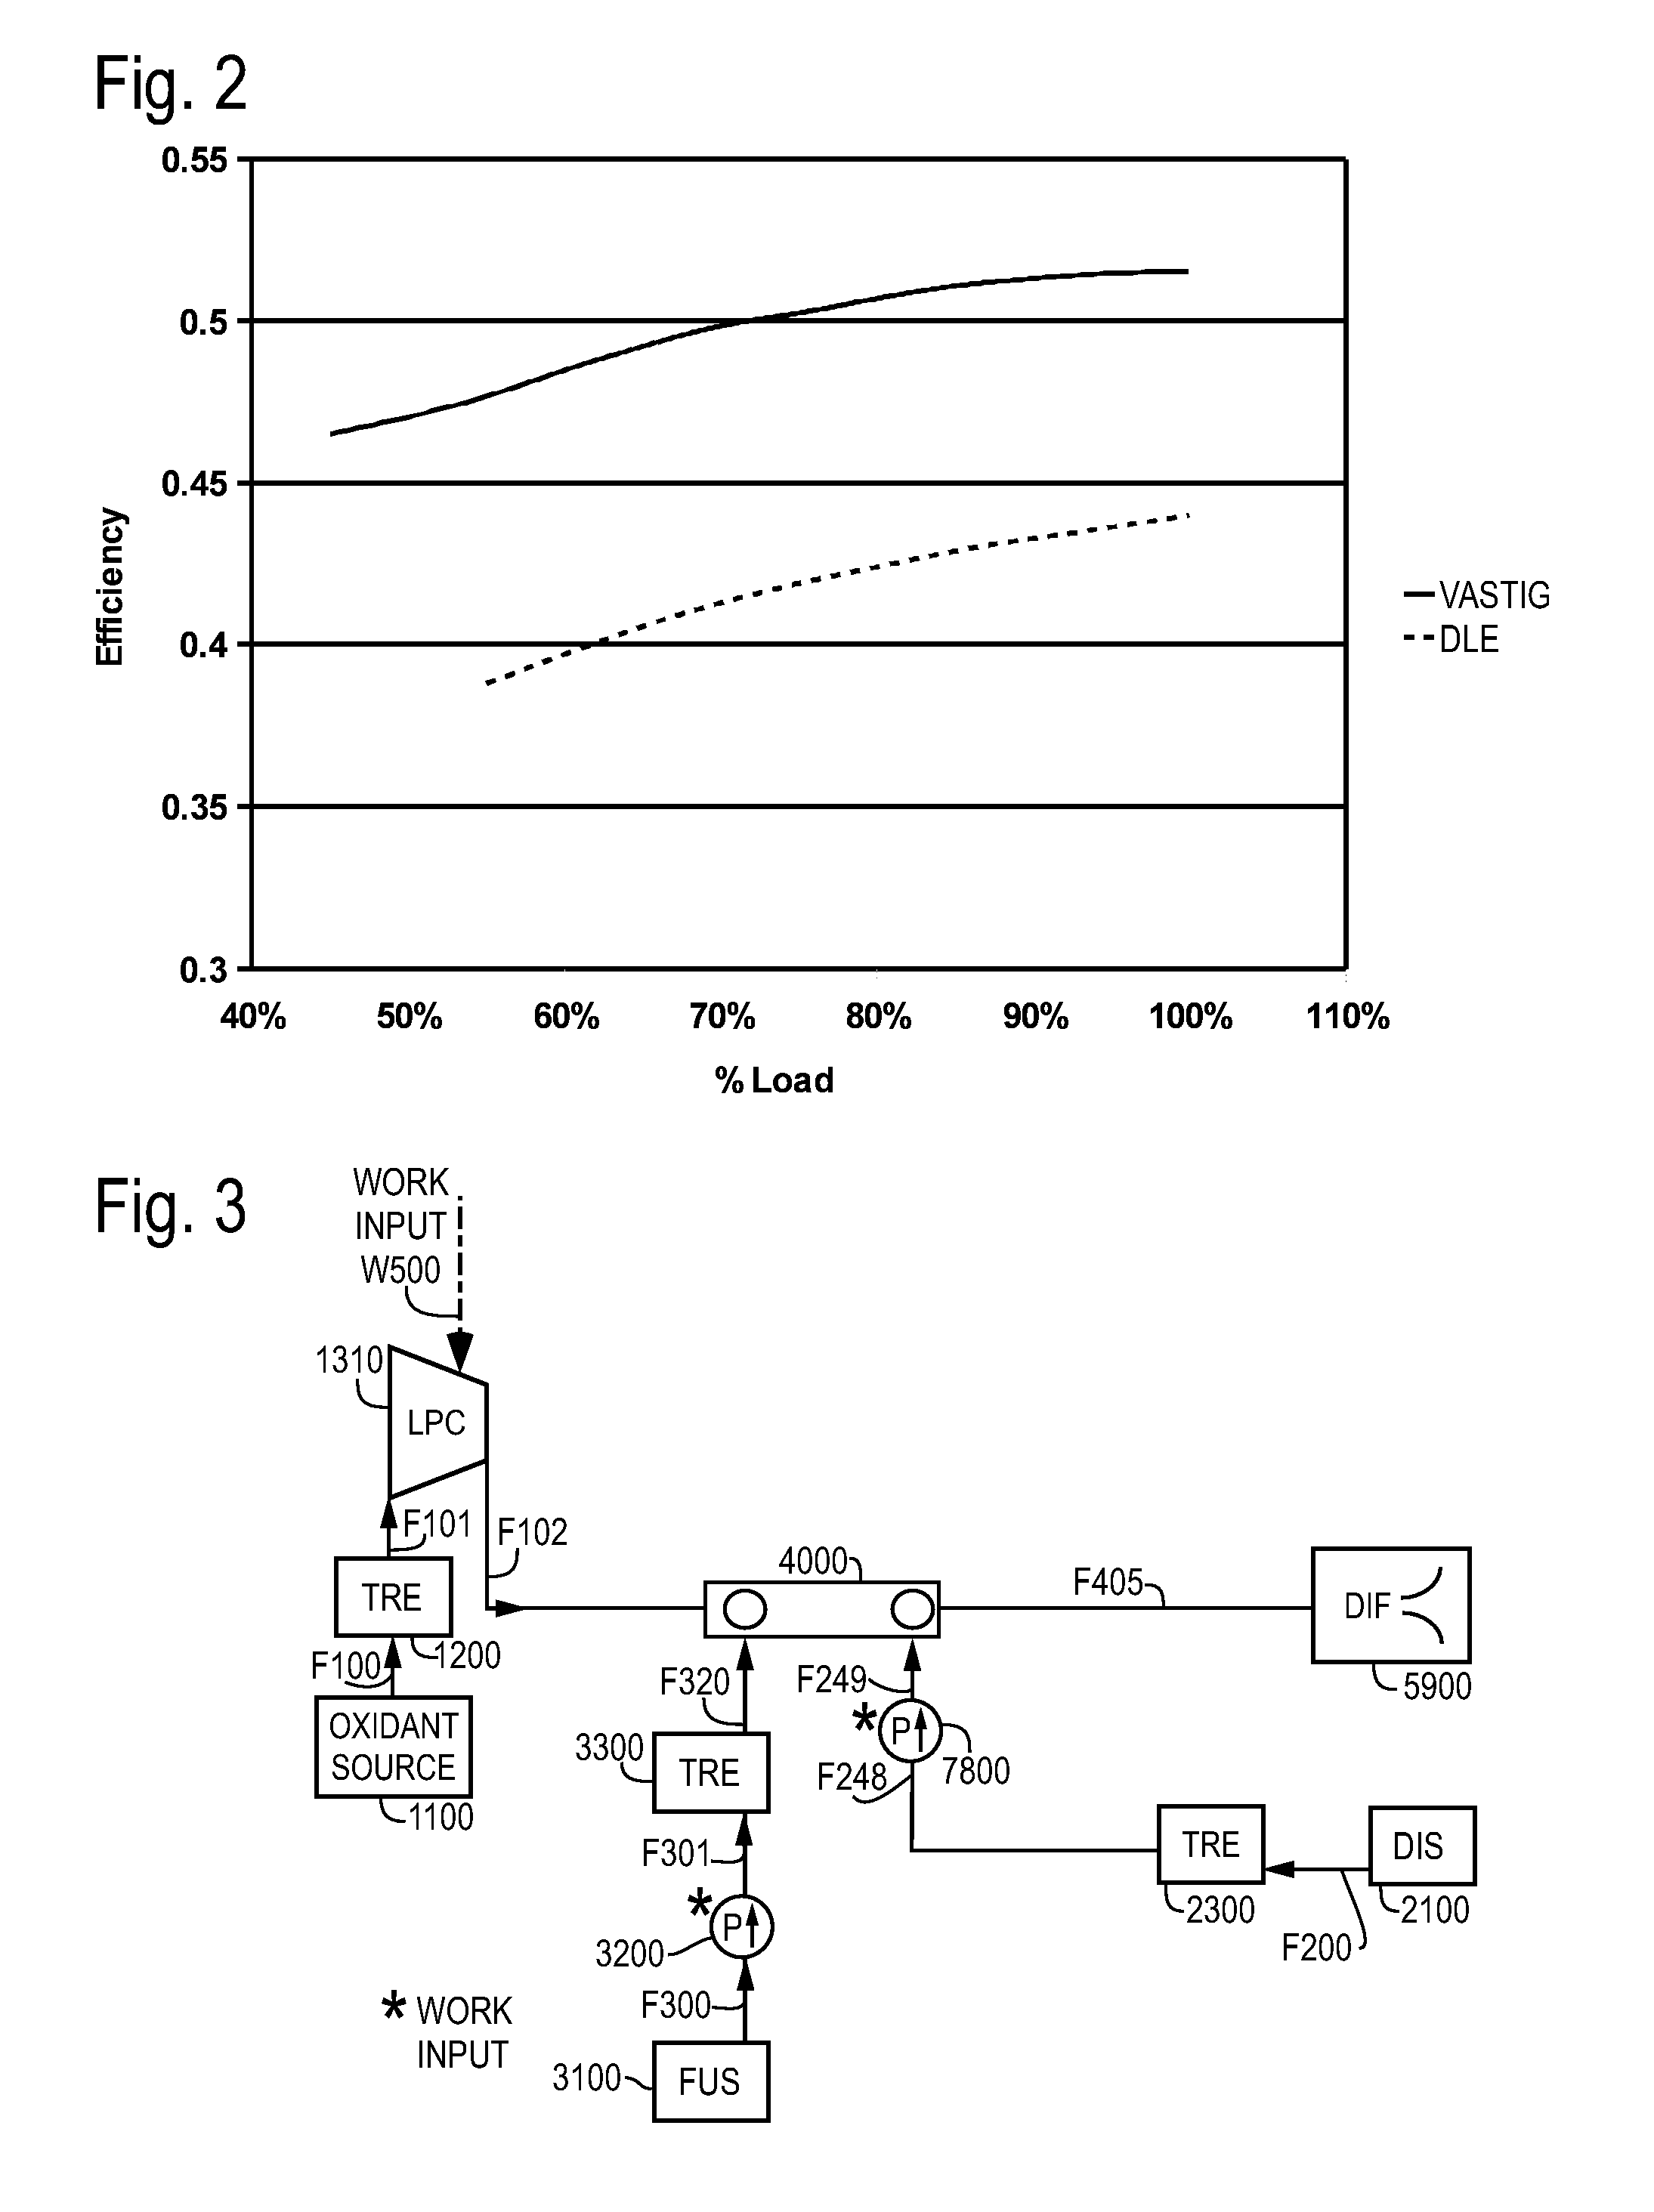 Partial load combustion cycles